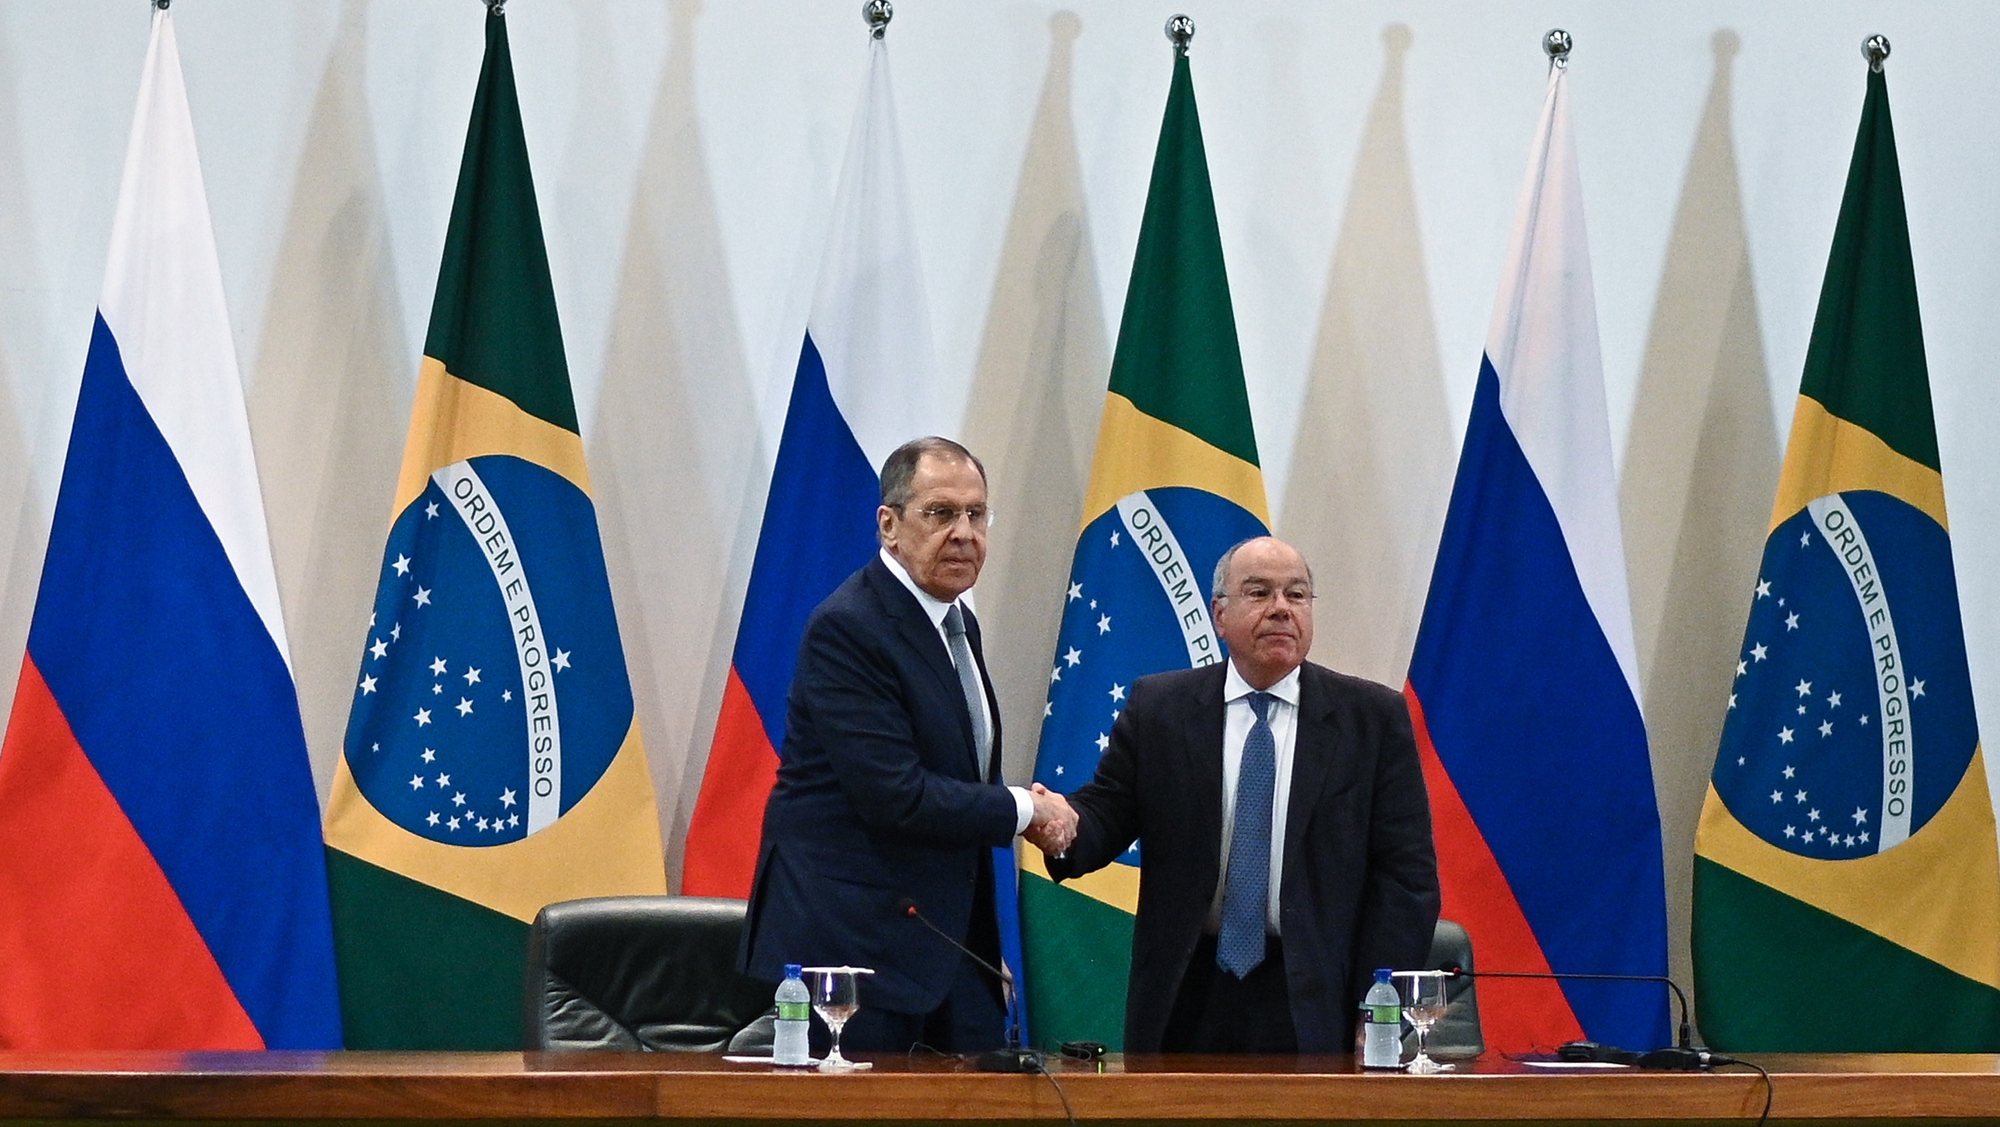 epa10577268 Russian Foreign Minister Sergei Lavrov takes part in a press conference along with Brazilian Foreign Minister Mauro Vieira (R), at the Itamaraty Palace in Brasilia, Brazil, 17 April 2023. Russian Foreign Minister Lavrov visits Brazil at the beginning of a tour of the Latin American countries that have the best relations with Moscow.  EPA/ANDRE BORGES